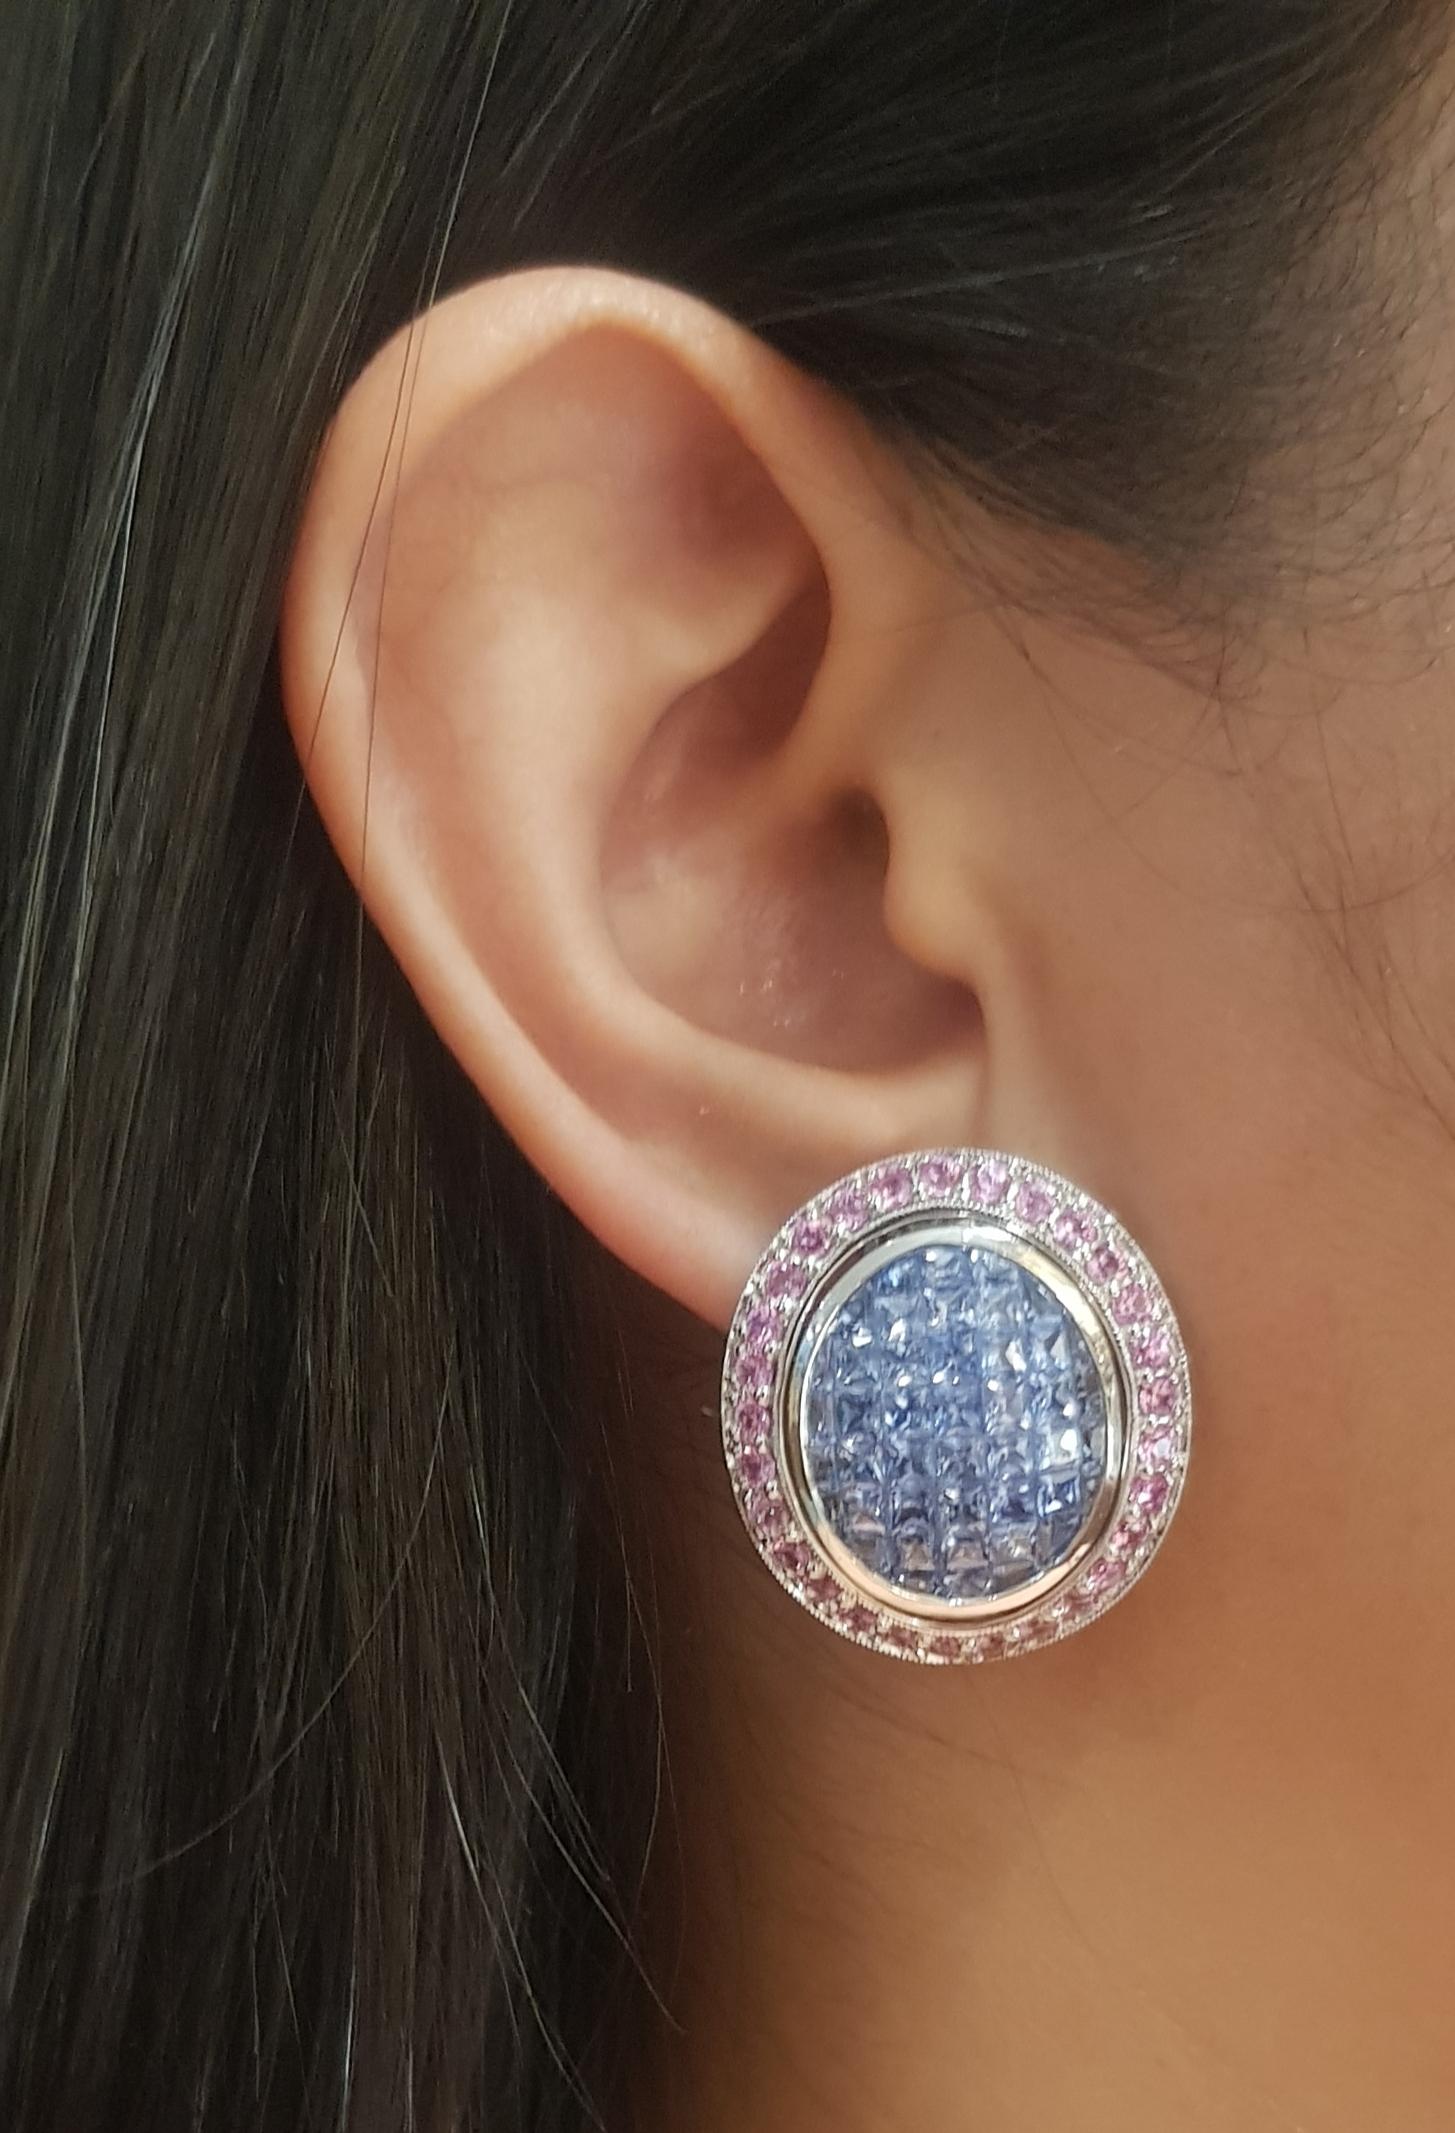 Blue Sapphire 12.40 carats and Pink Sapphire 3.54 carats Earrings set in 18K White Gold Settings

Width: 2.5 cm 
Length: 2.8 cm
Total Weight: 31.06 grams

